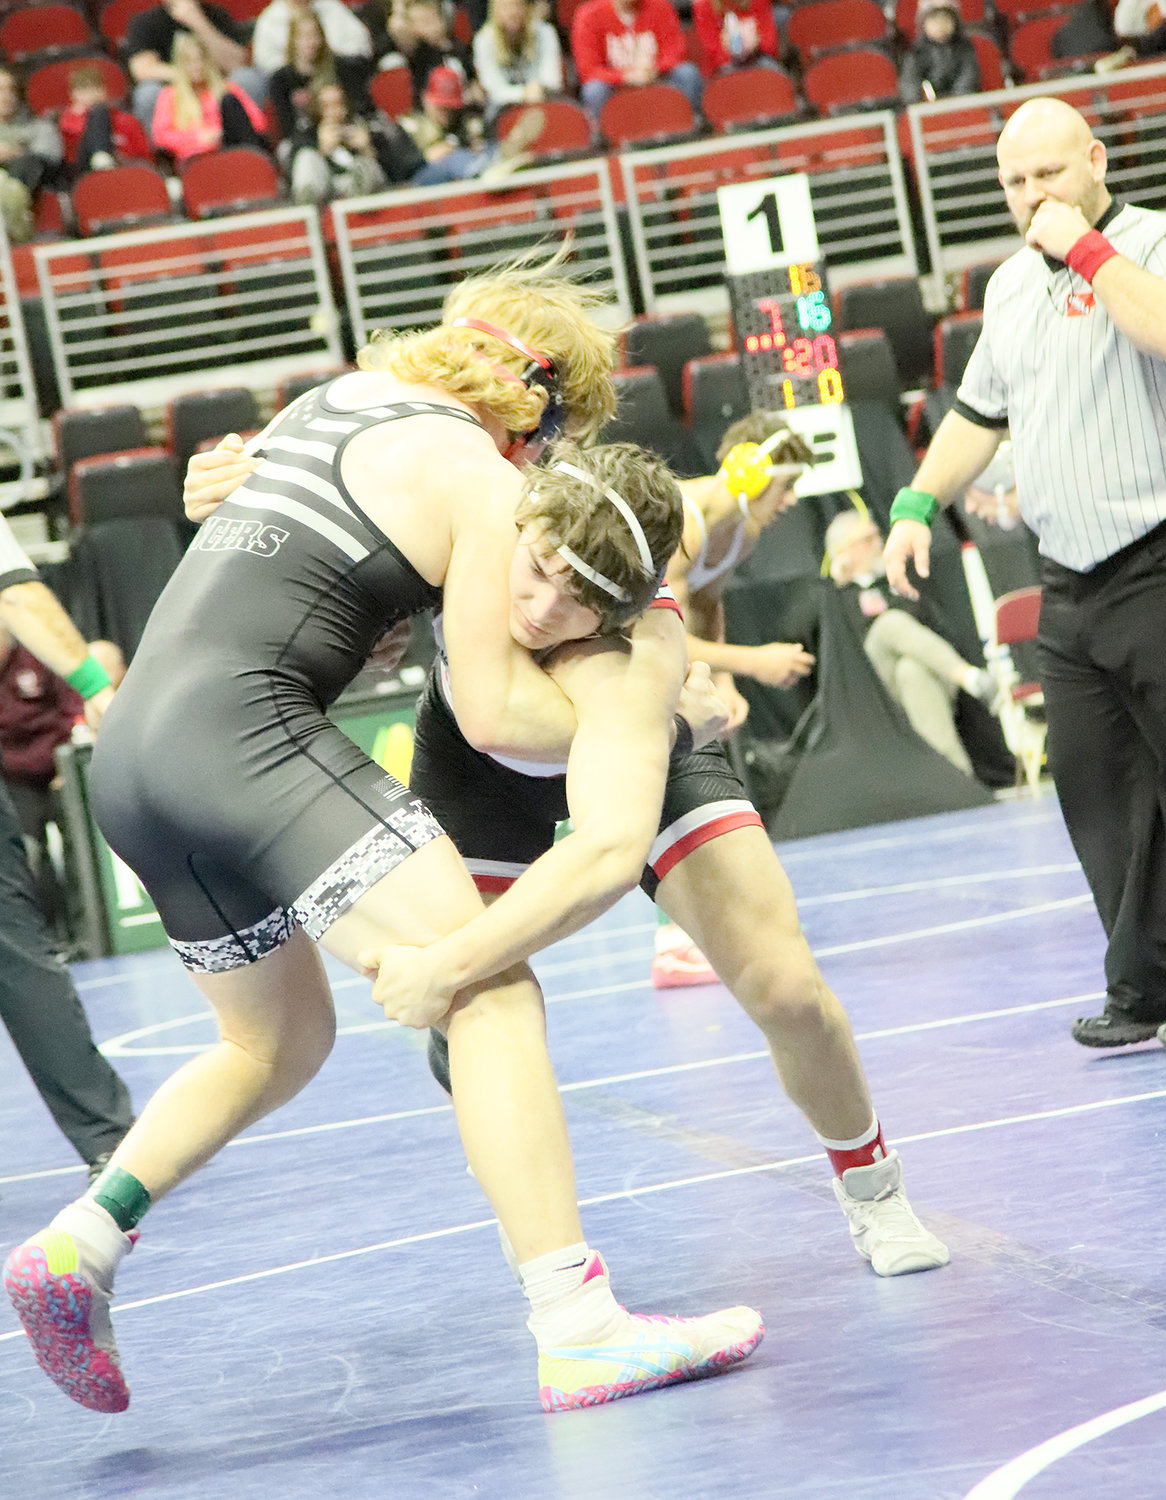 Thacher tries to get a leg for control in the early going of his match with North Scott's AJ Peterson Saturday at Wells-Fargo Arena in Des Moines.